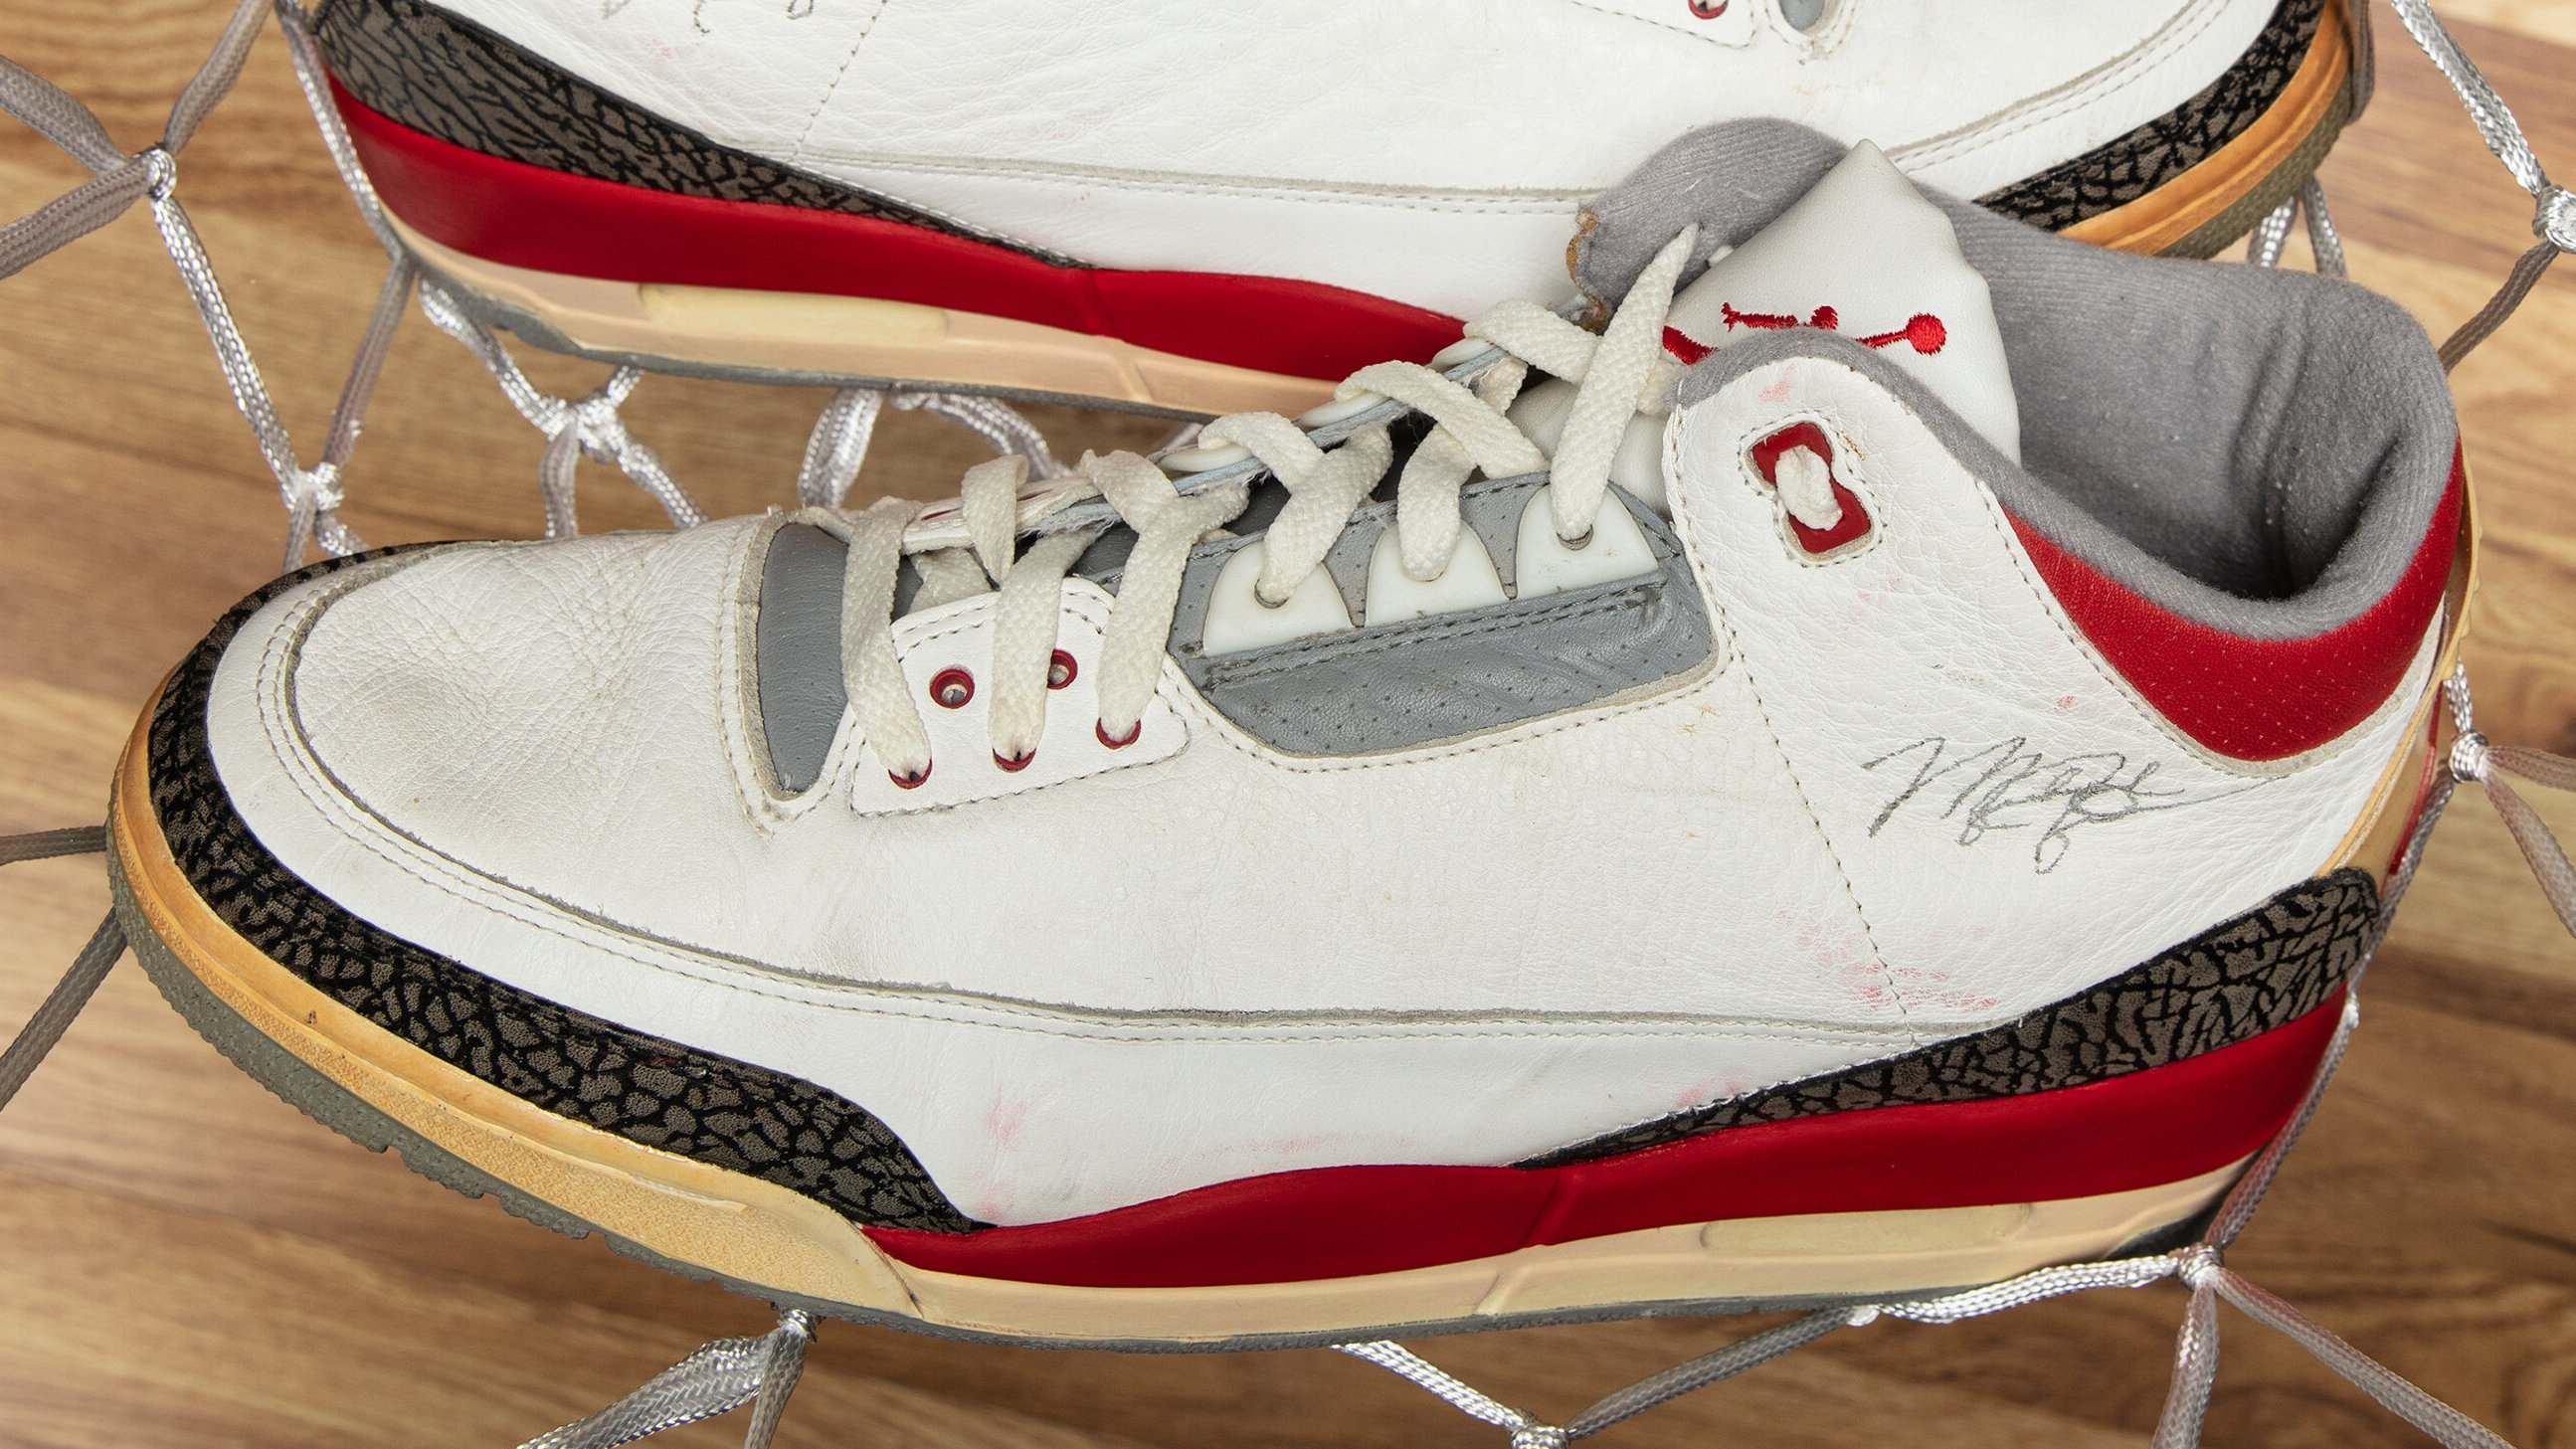 Air Jordan 3 Fire Red OG 2022 Retro Release Date | Sole Collector